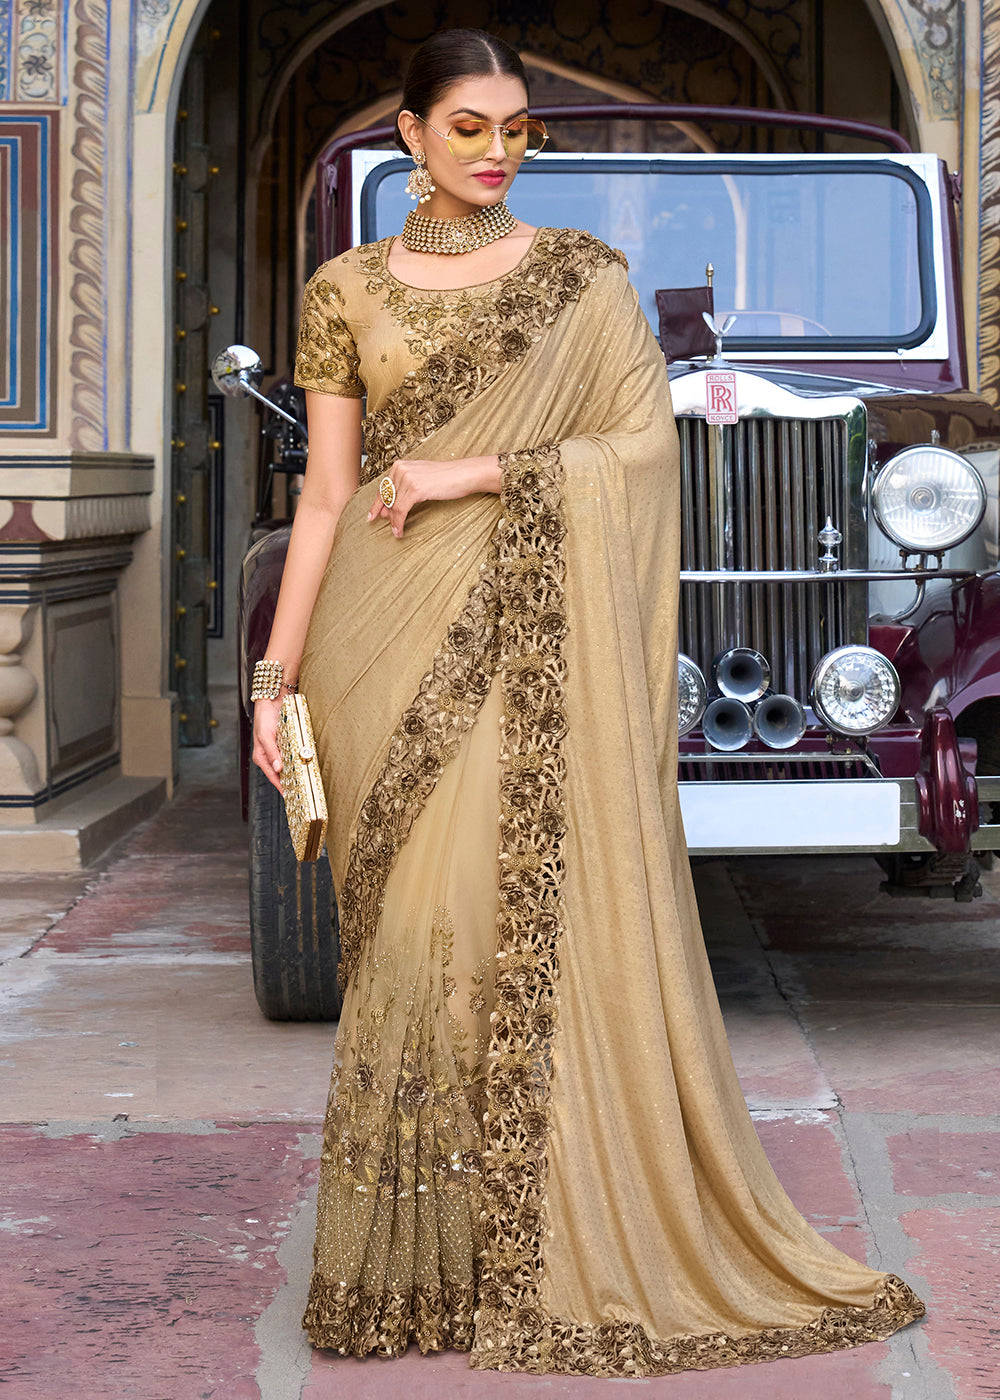 Buy Now Chickoo Beige Applique Net Designer Bridal Party Wear Saree Online in USA, UK, Canada & Worldwide at Empress Clothing.